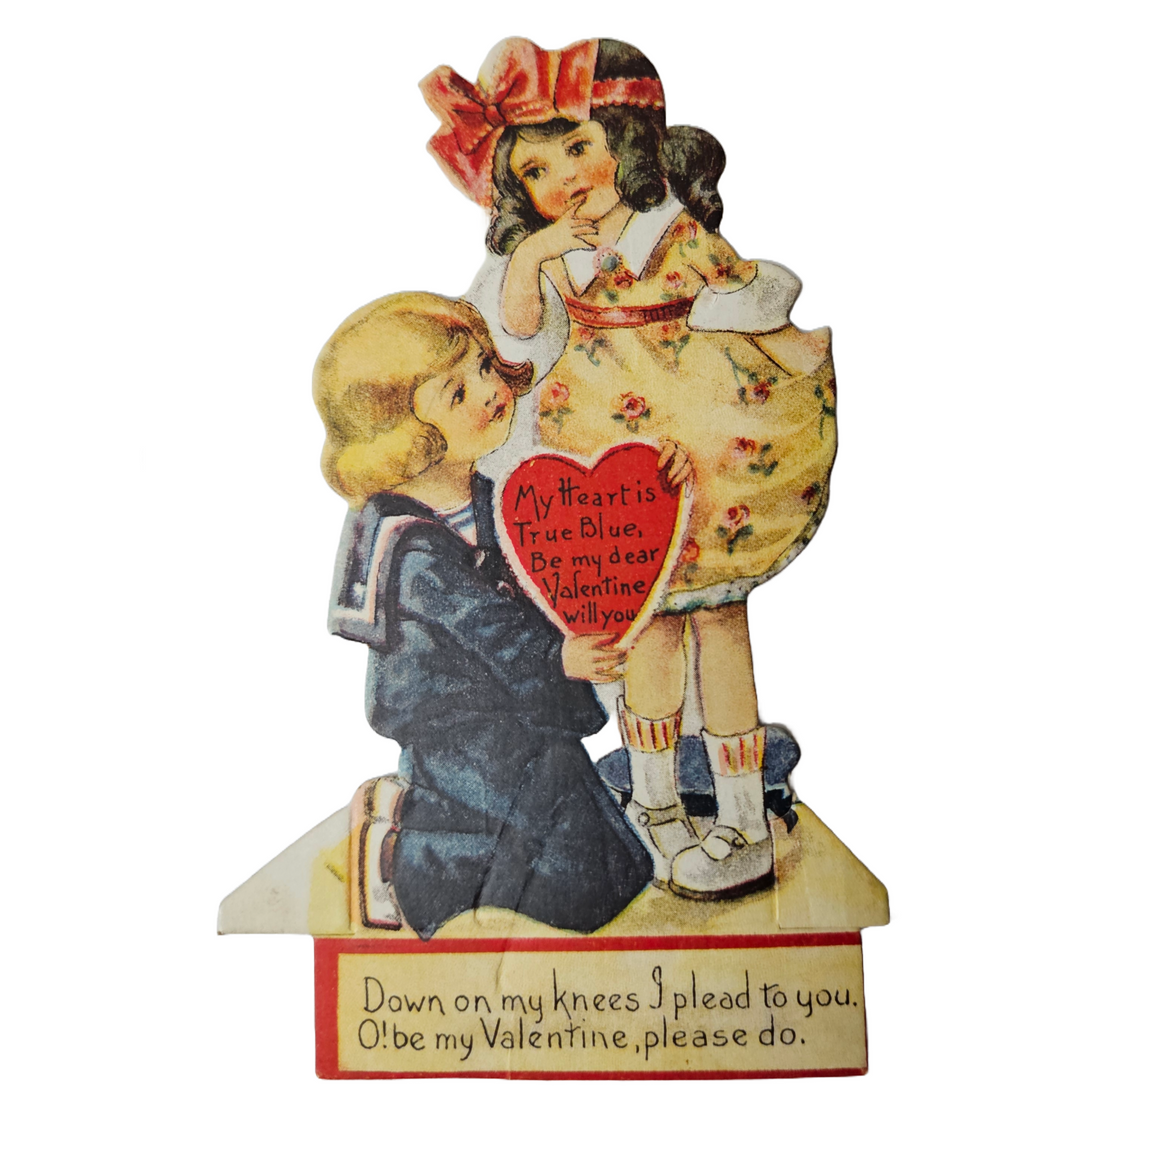 Antique Vintage Die Cut Valentine Card Little Boy On Knee Pleading with Little Girl to Be His Sweetheart